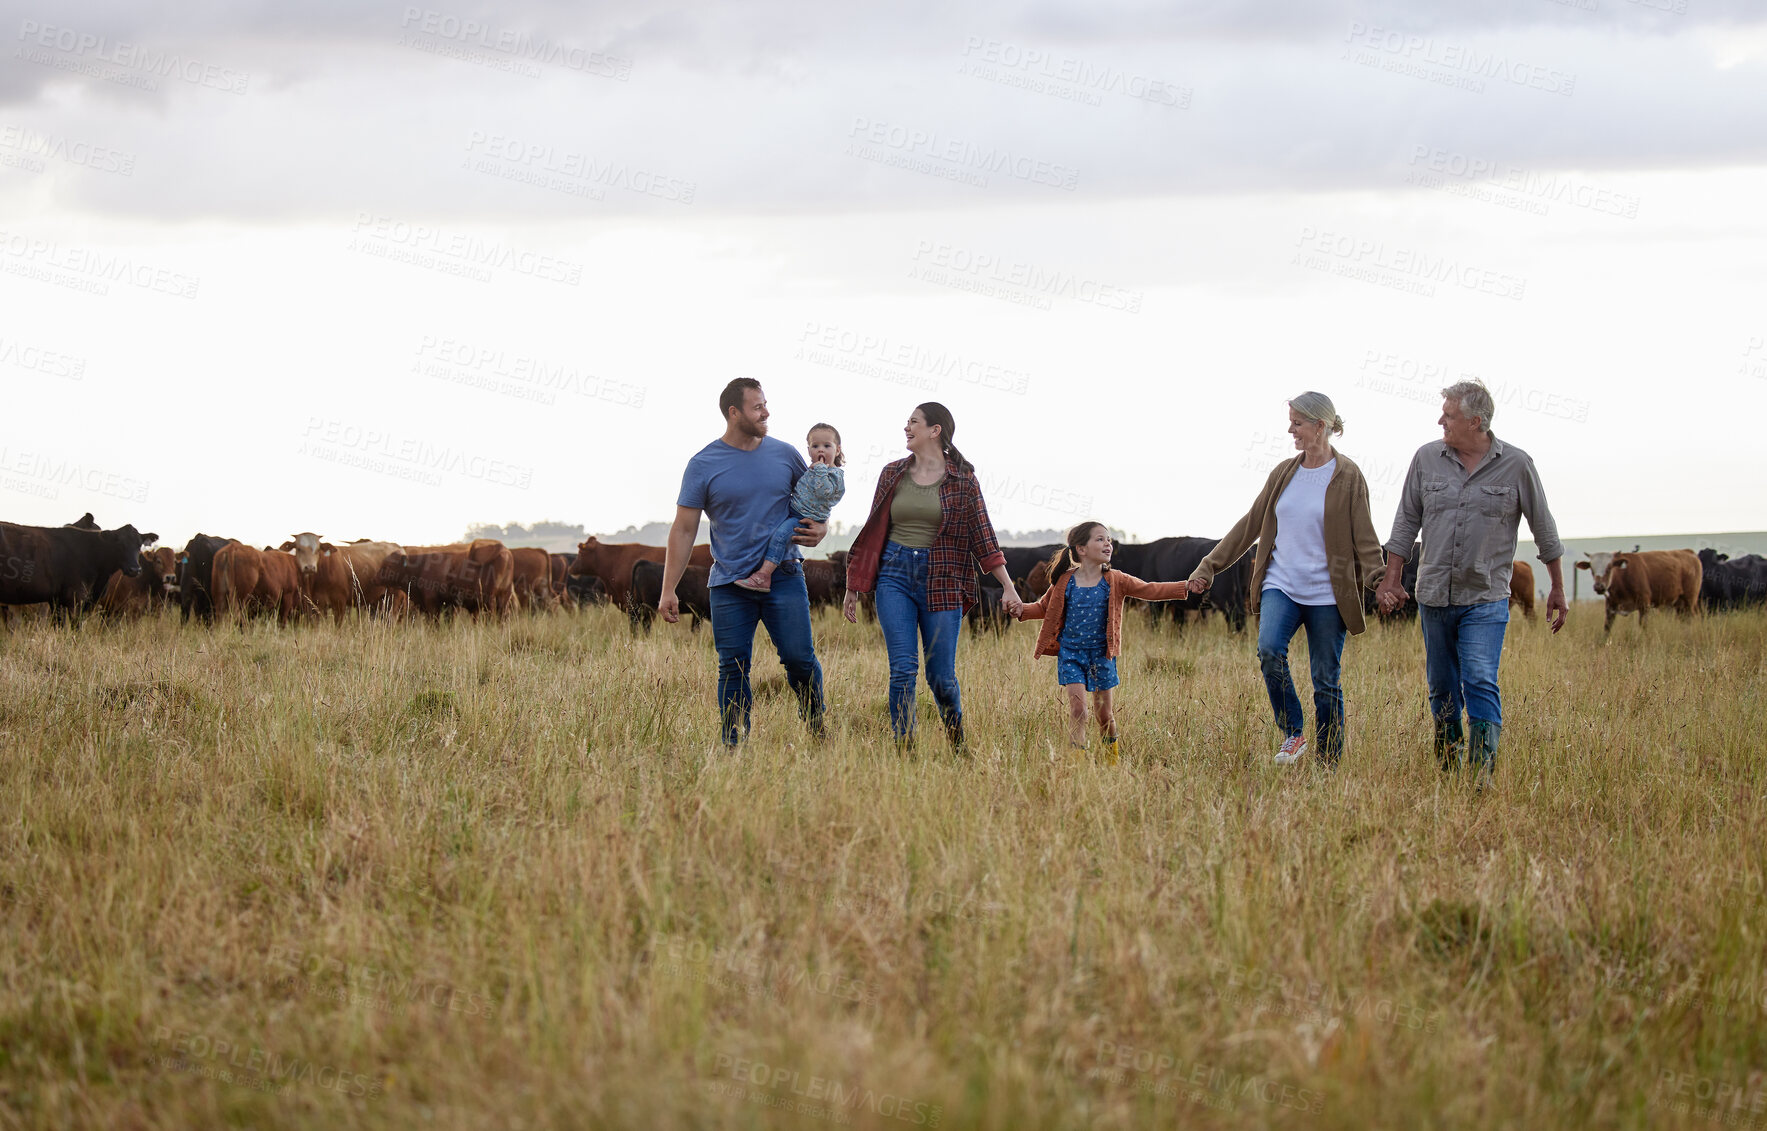 Buy stock photo Farming, sustainability and family community on a farm walking together with cows in the background. Happy agriculture countryside group relax holding hands in a green sustainable field in nature